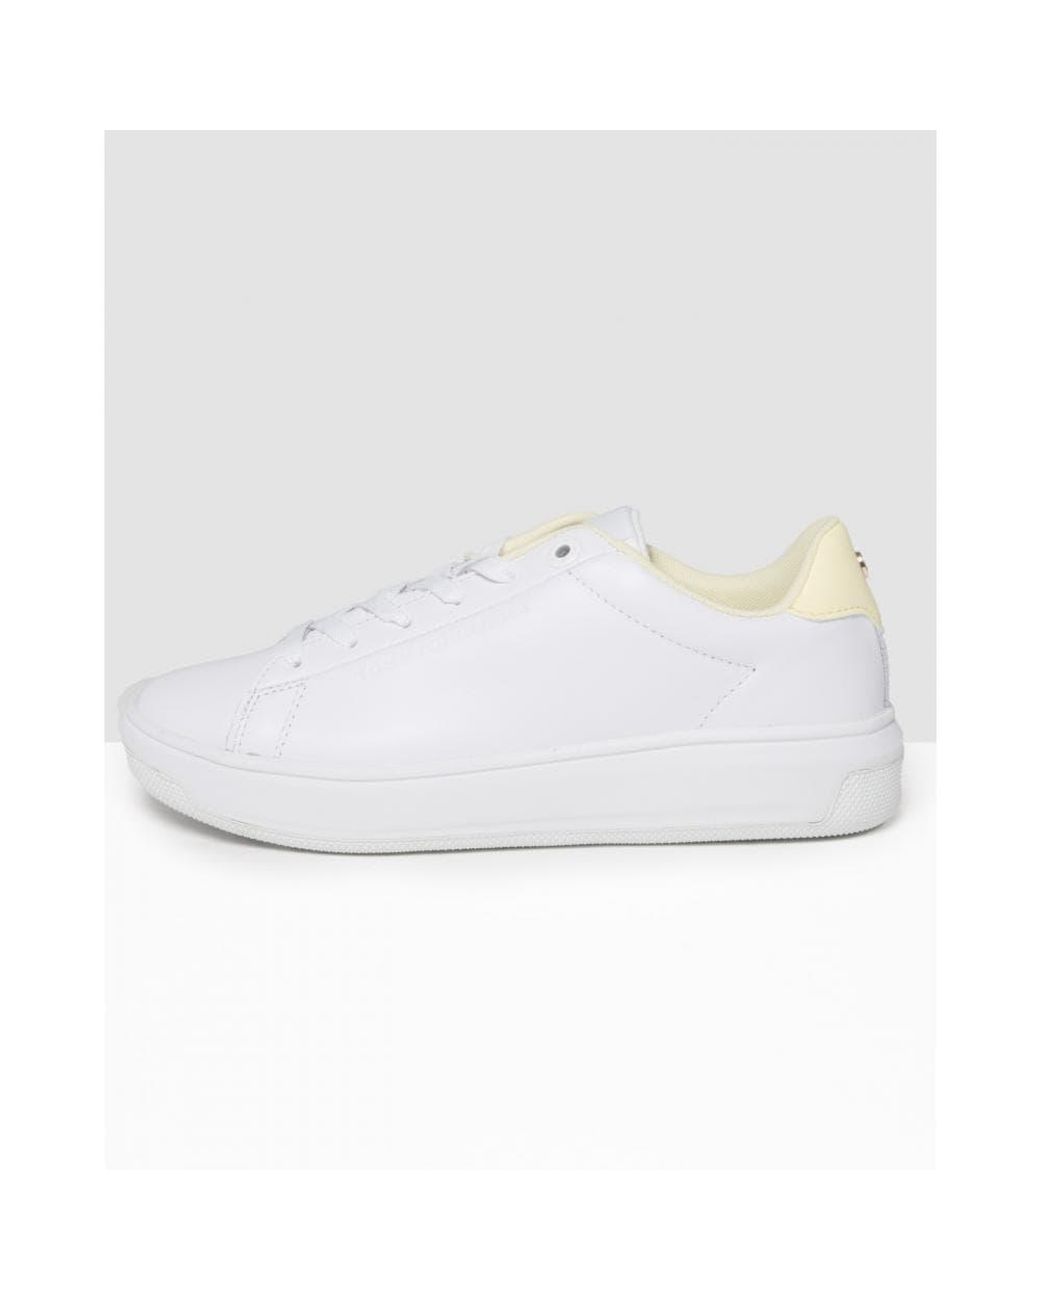 Tommy Hilfiger Lowcut Leather Cupsole Trainers in White | Lyst UK